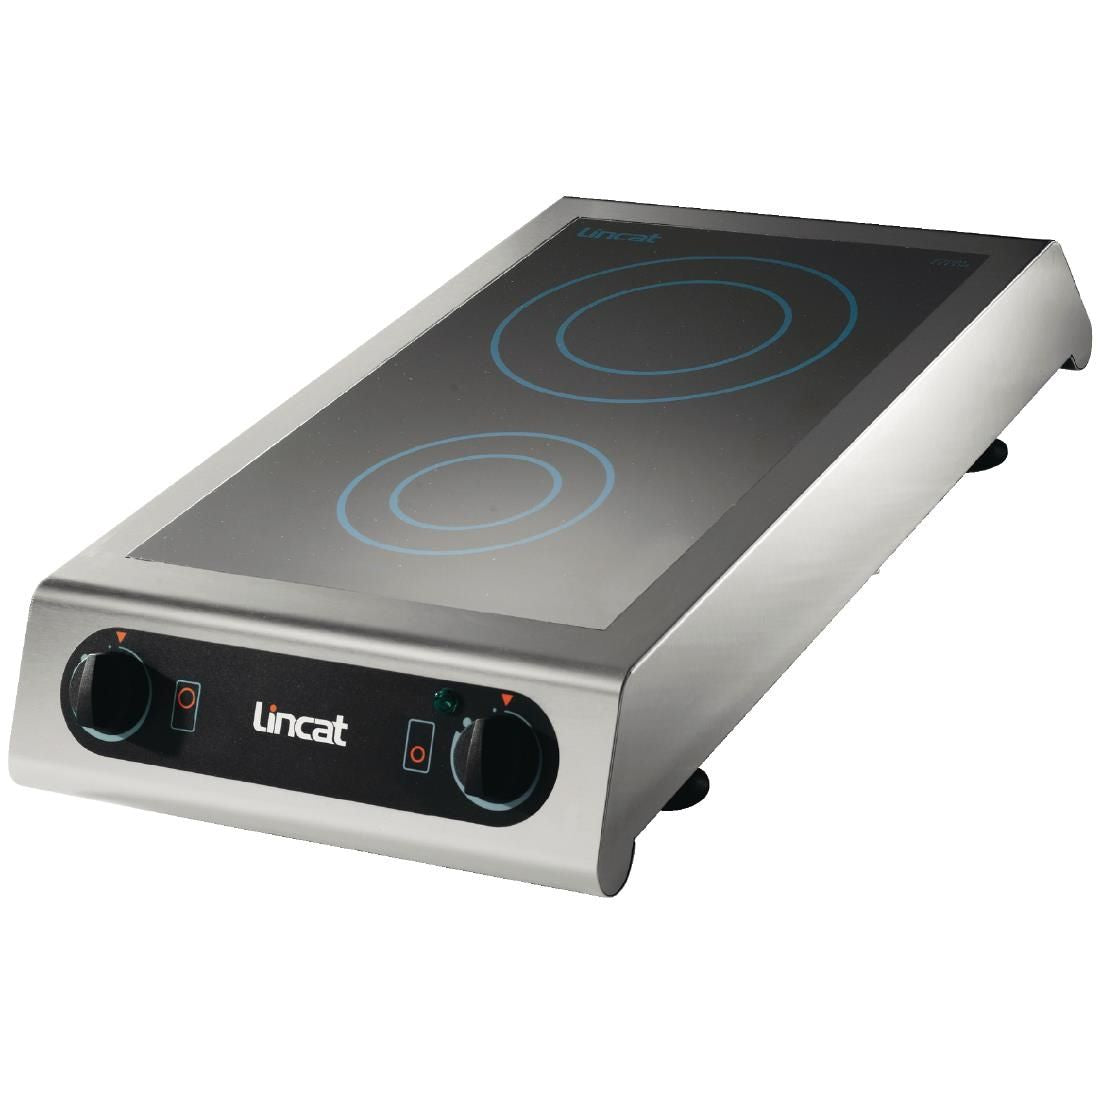 IH21 - Lincat Electric Counter-top Induction Hob - 2 Zones - W 350 mm - 3.0 kW DK977 JD Catering Equipment Solutions Ltd